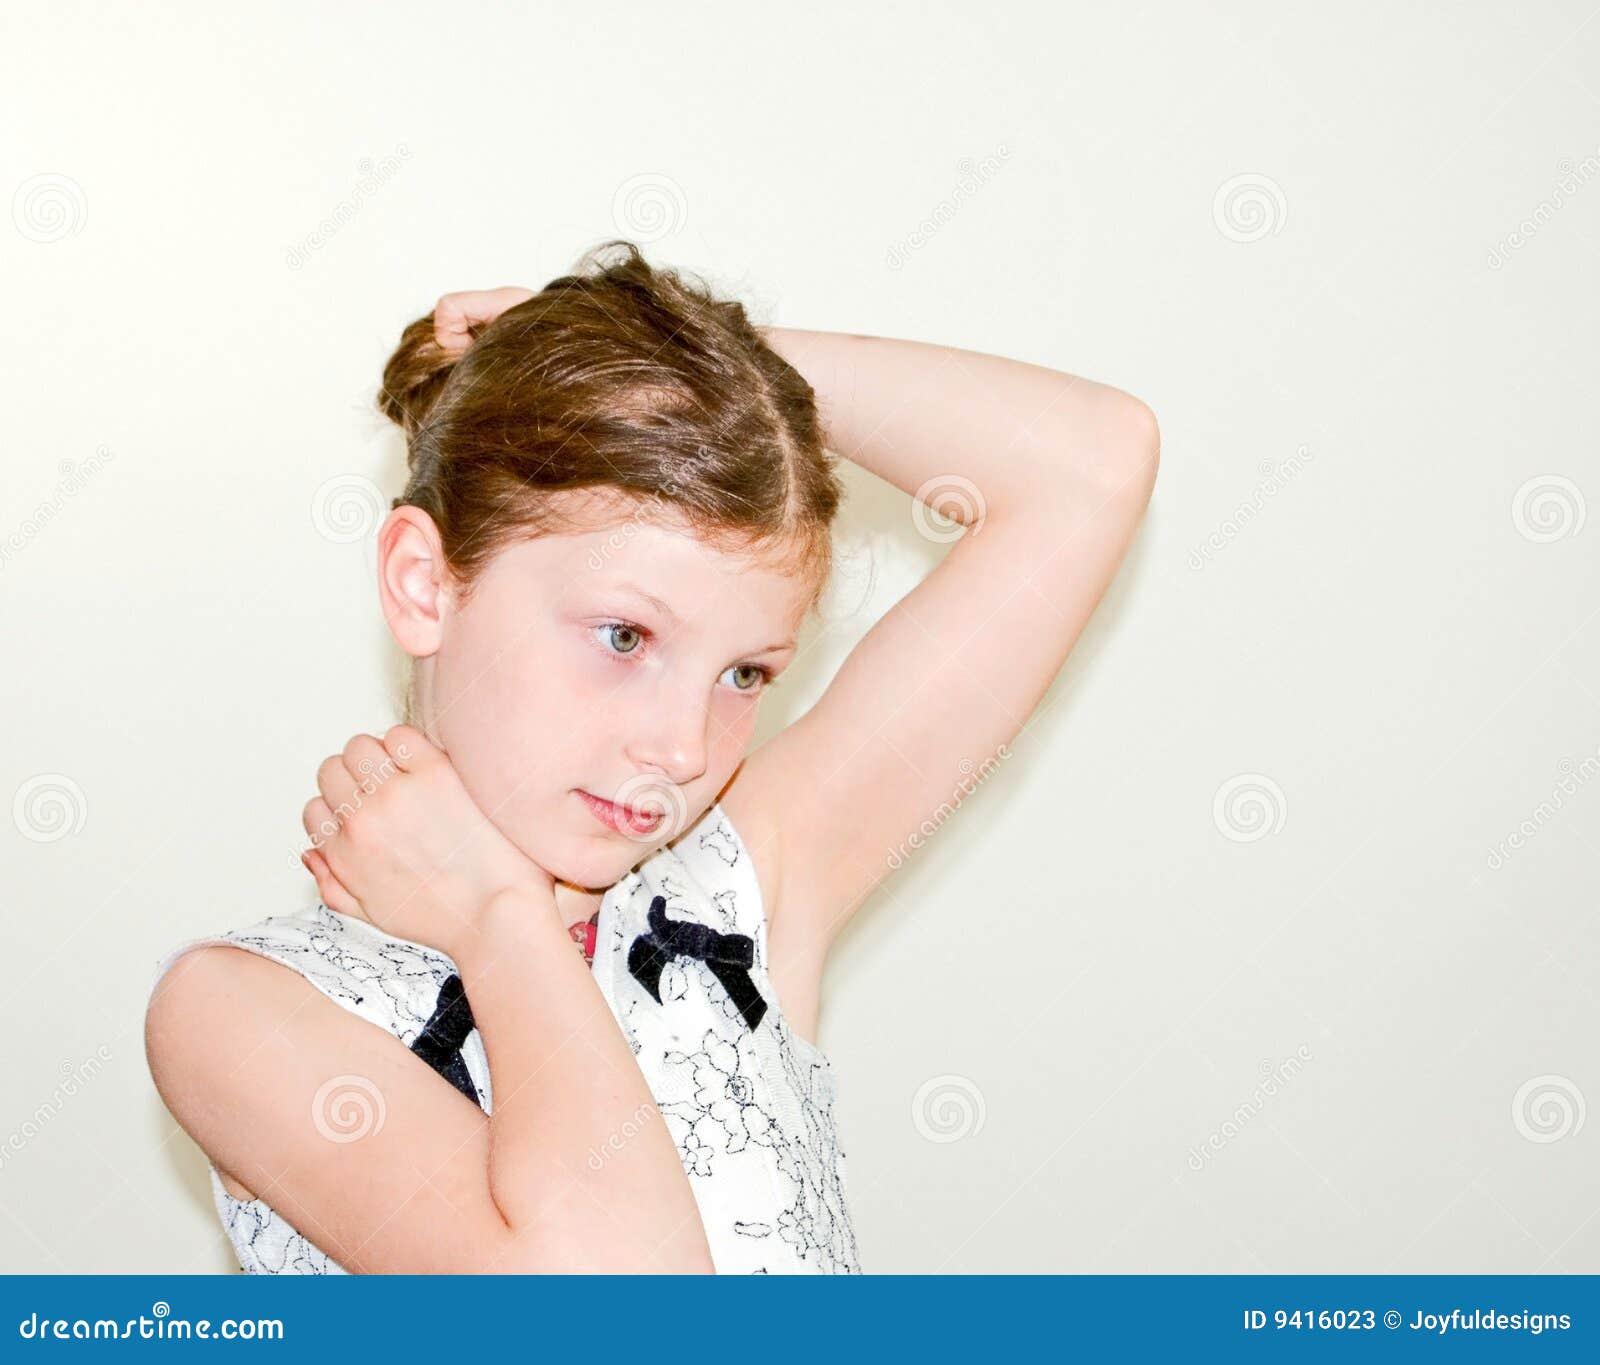 8 Year Old Girl Playing with Her Hair Stock Image - Image of hair,  horizontal: 9416023